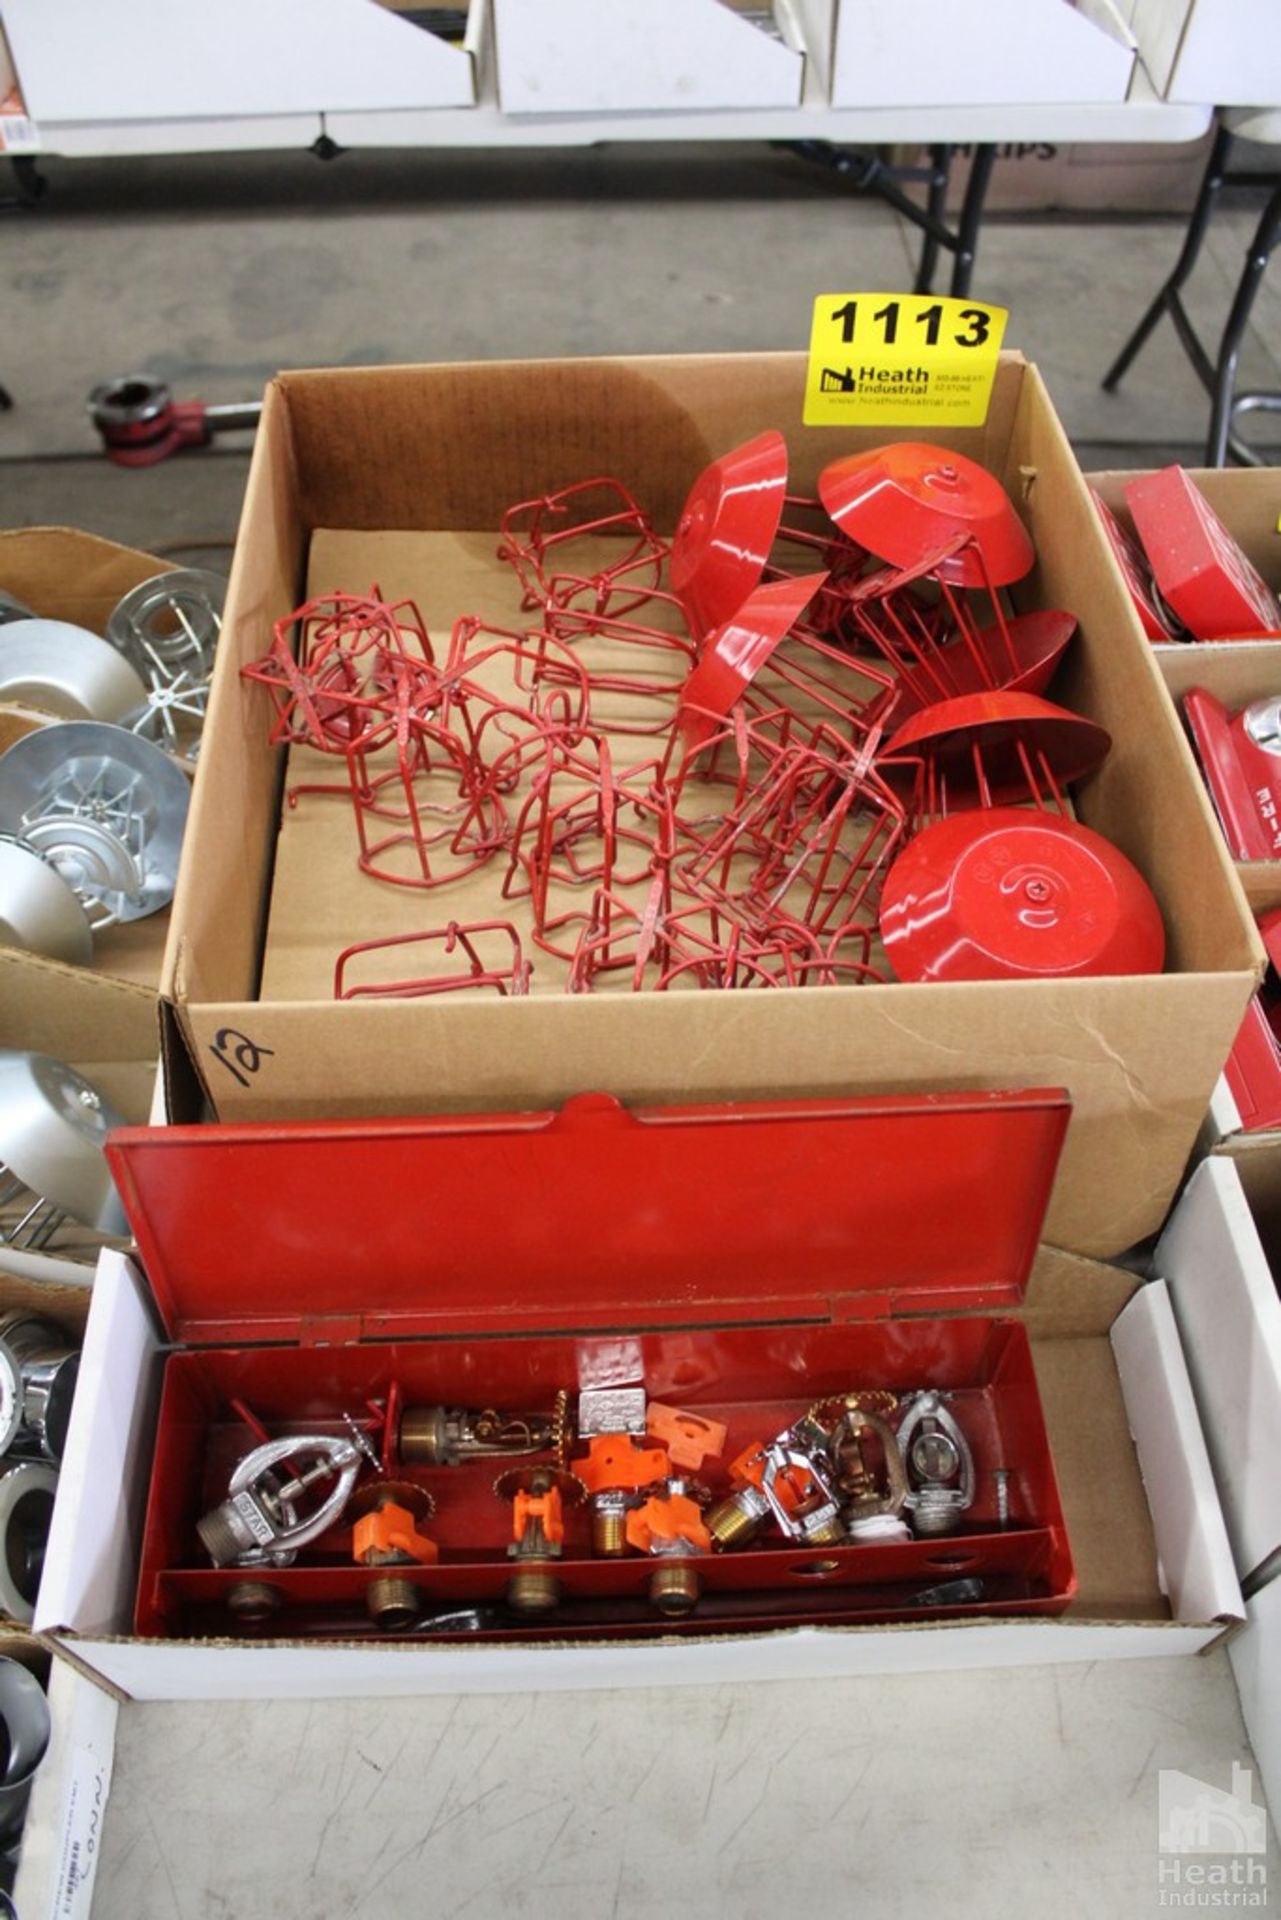 LARGE QUANTITY OF SPRINKLER CAGES AND HEADS